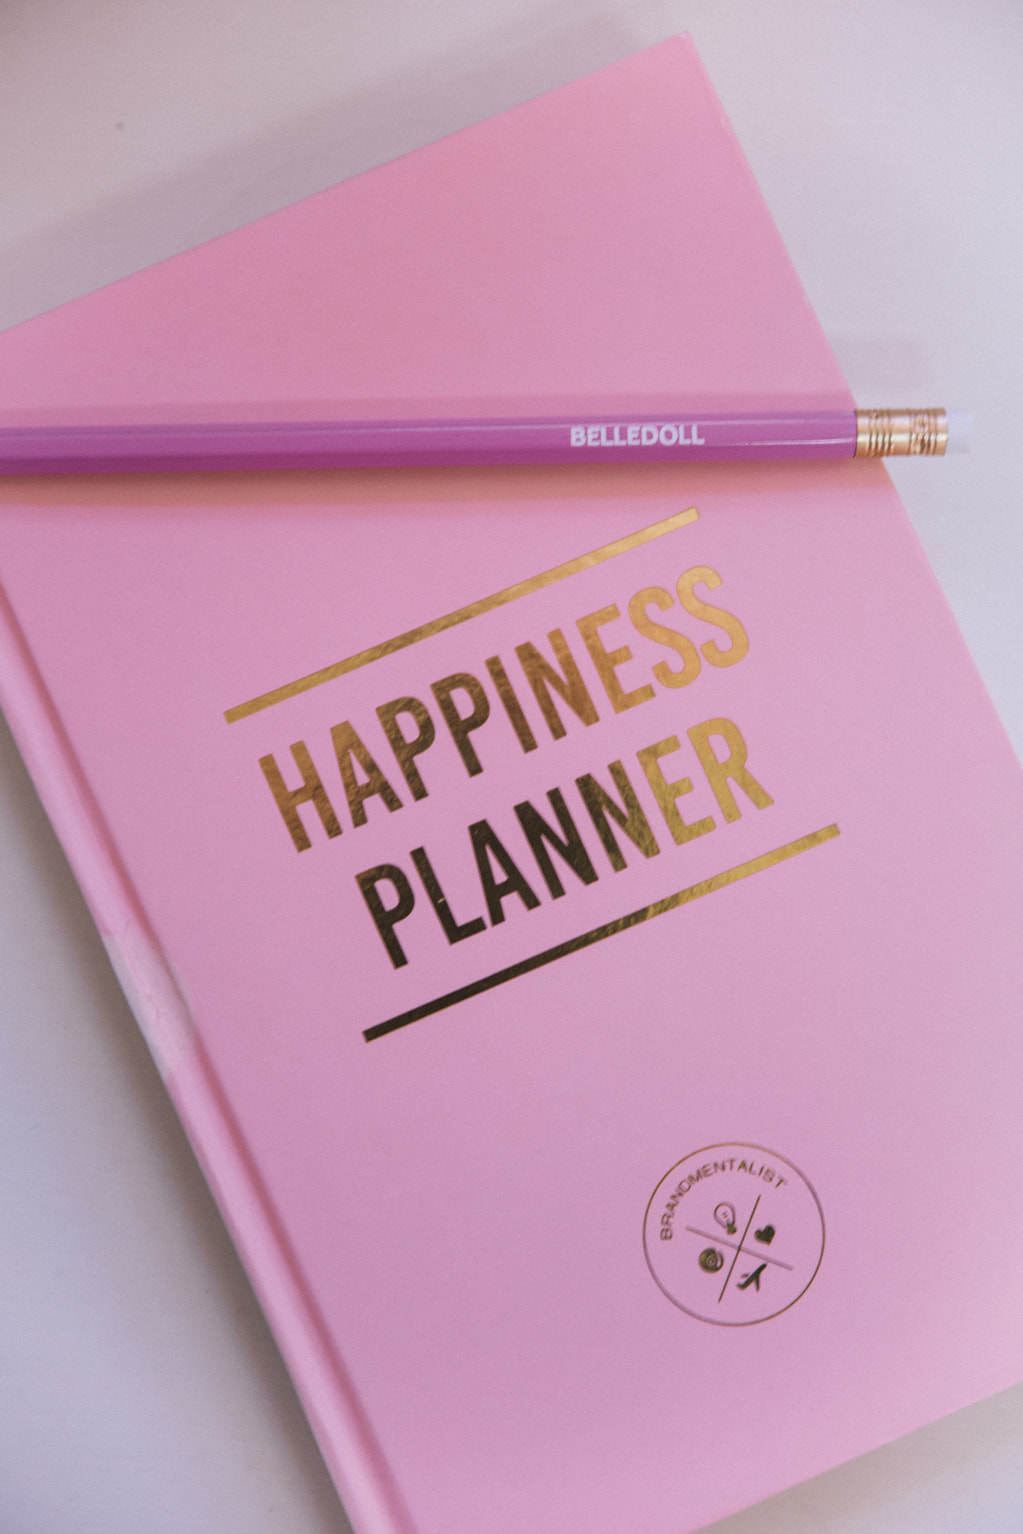 For The Love Of Stationery: Sprucing-Up Your To Do List